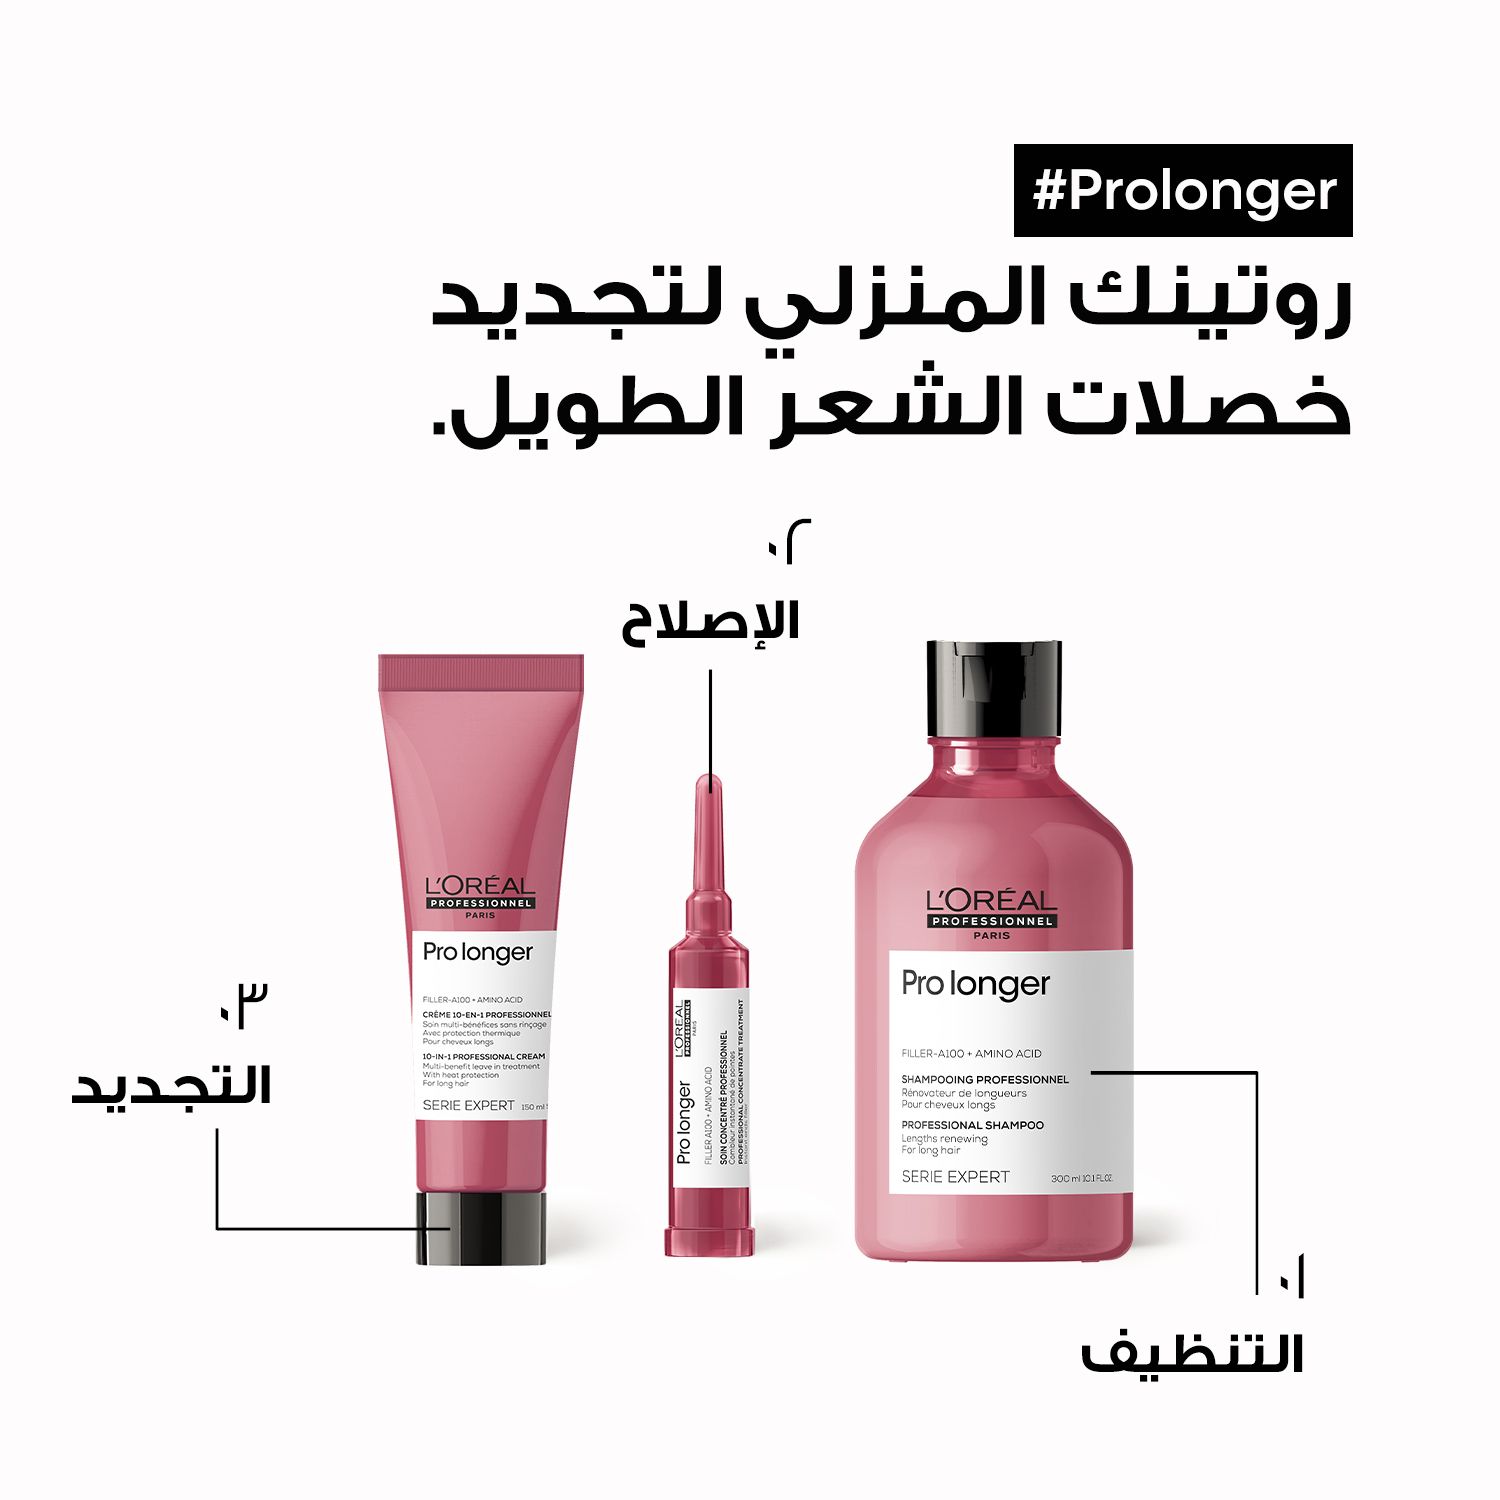 L’Oréal Professionnel Pro Longer shampoo With Filler-A100 and Amino Acid for long hair with thinned ends SERIE EXPERT 300 ml